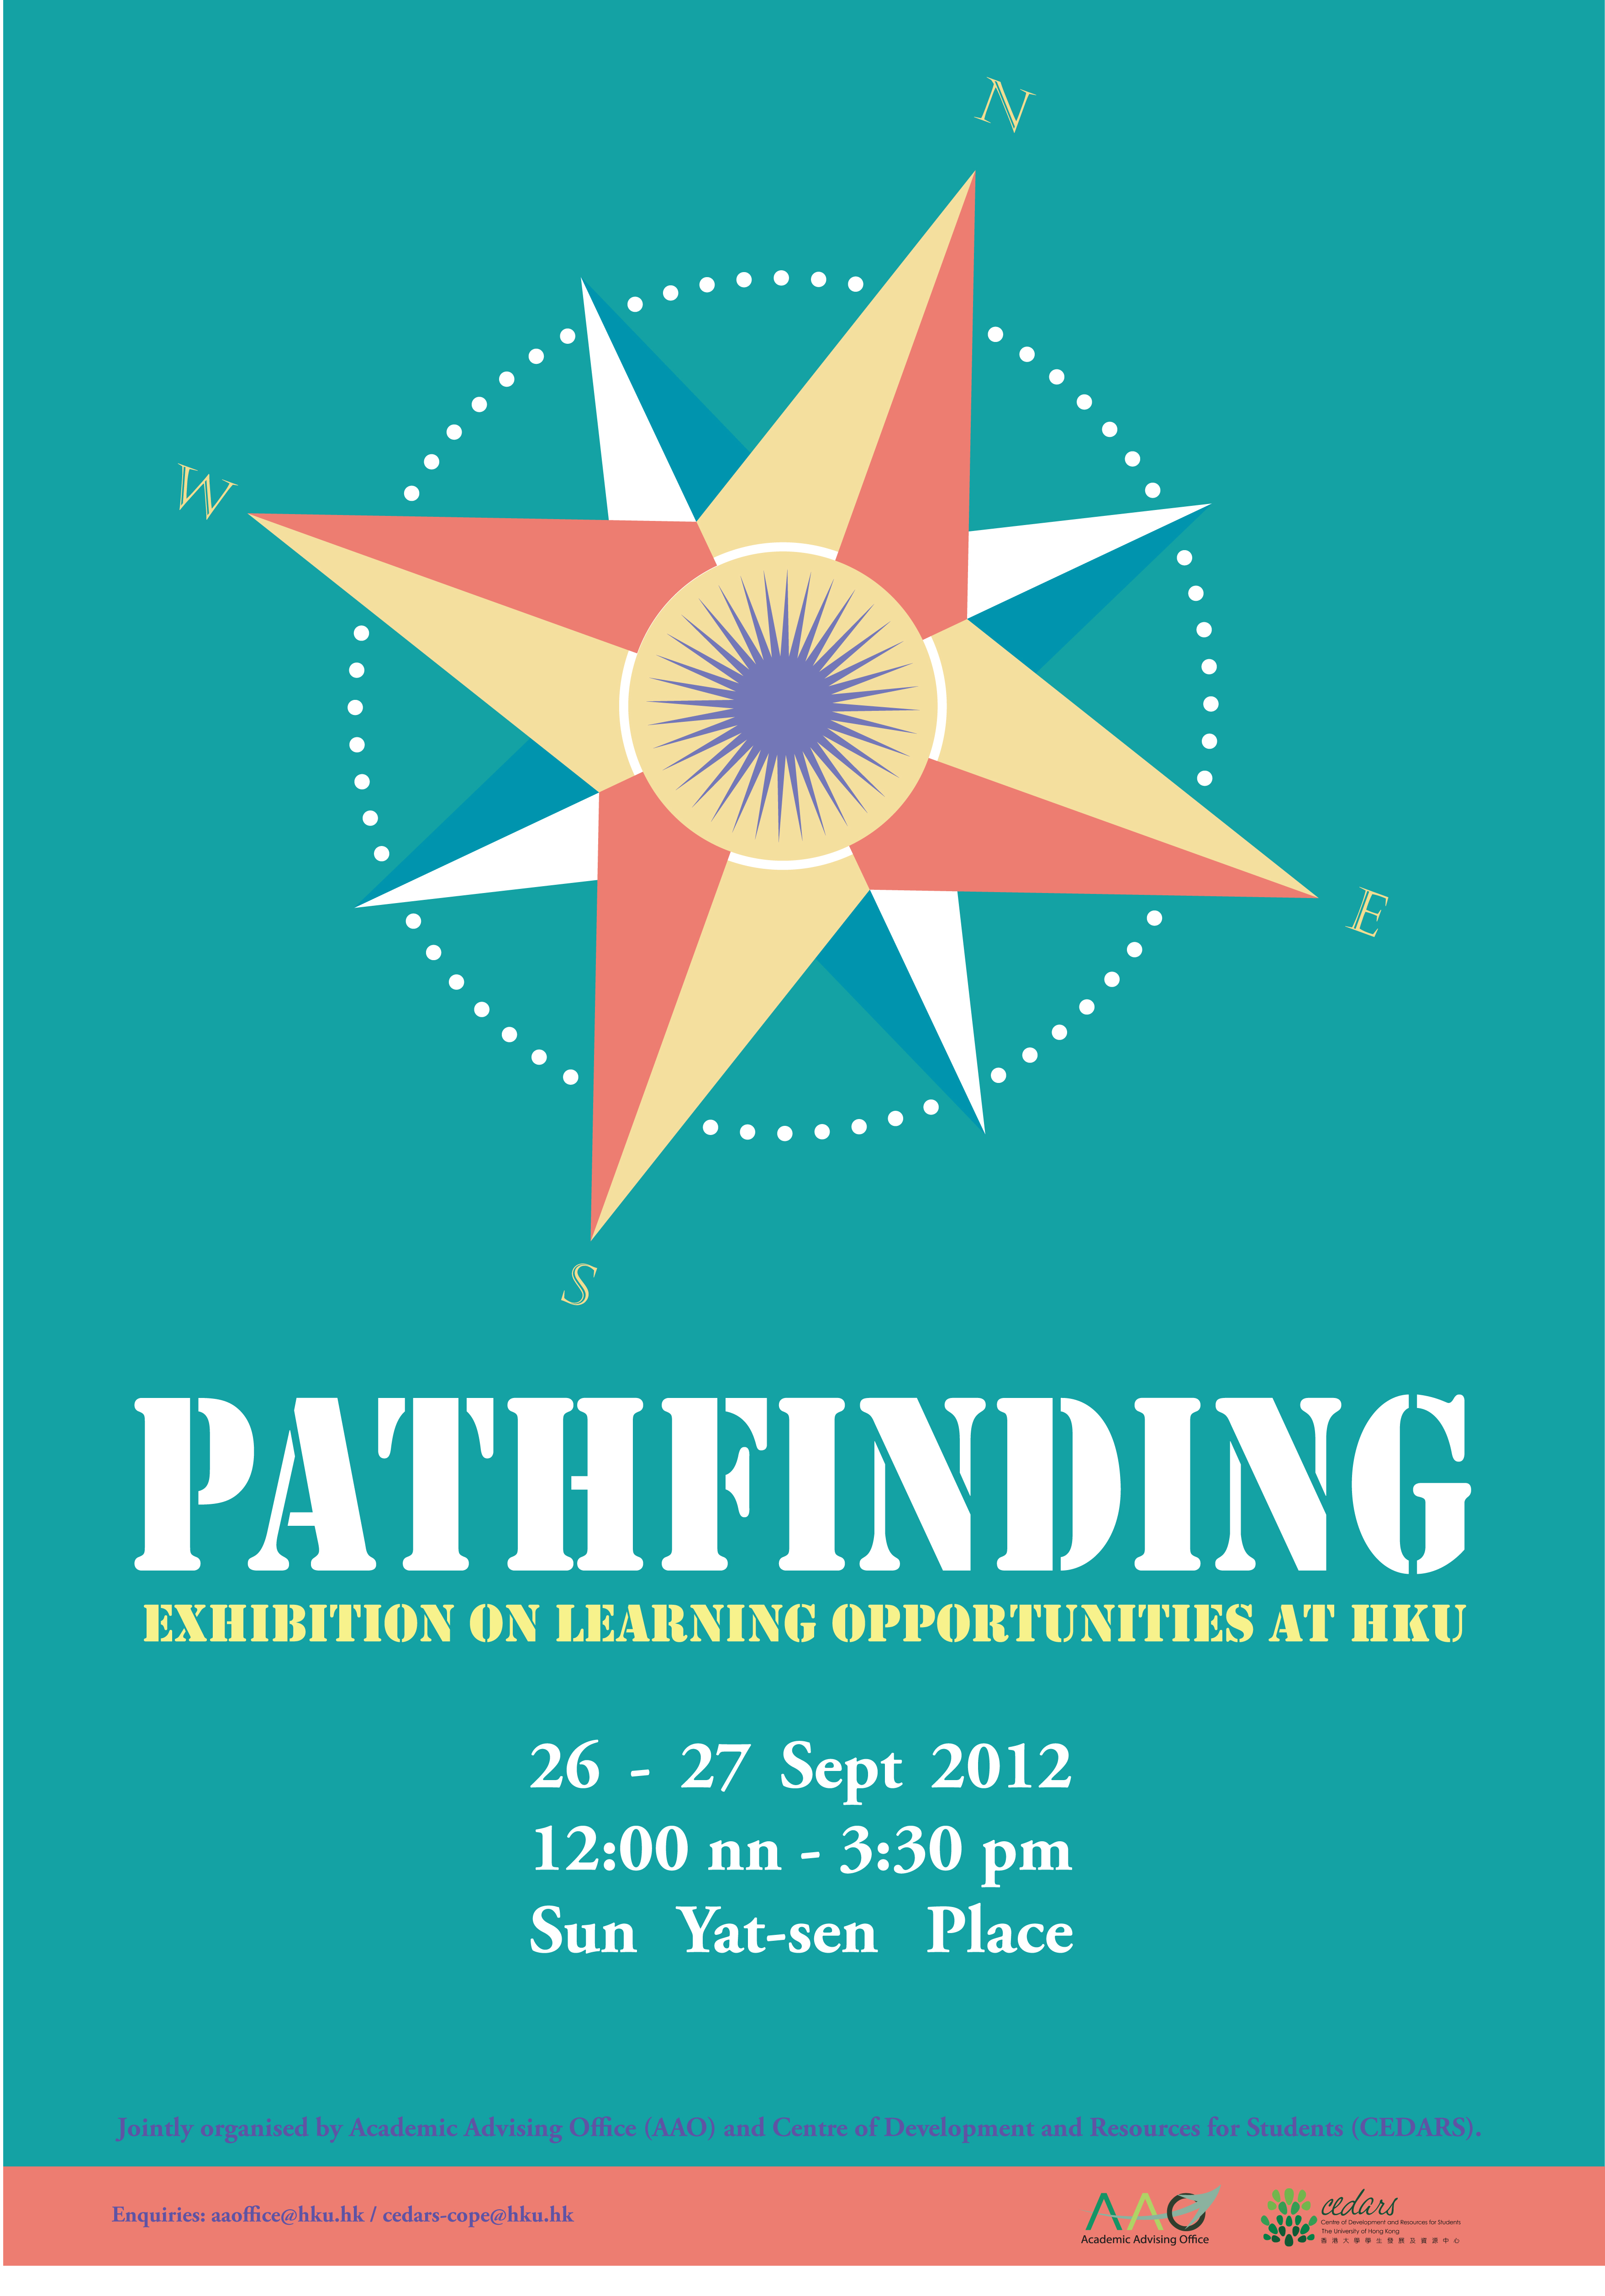 Pathfinding: Exhibition on Learning Opportunities at HKU 